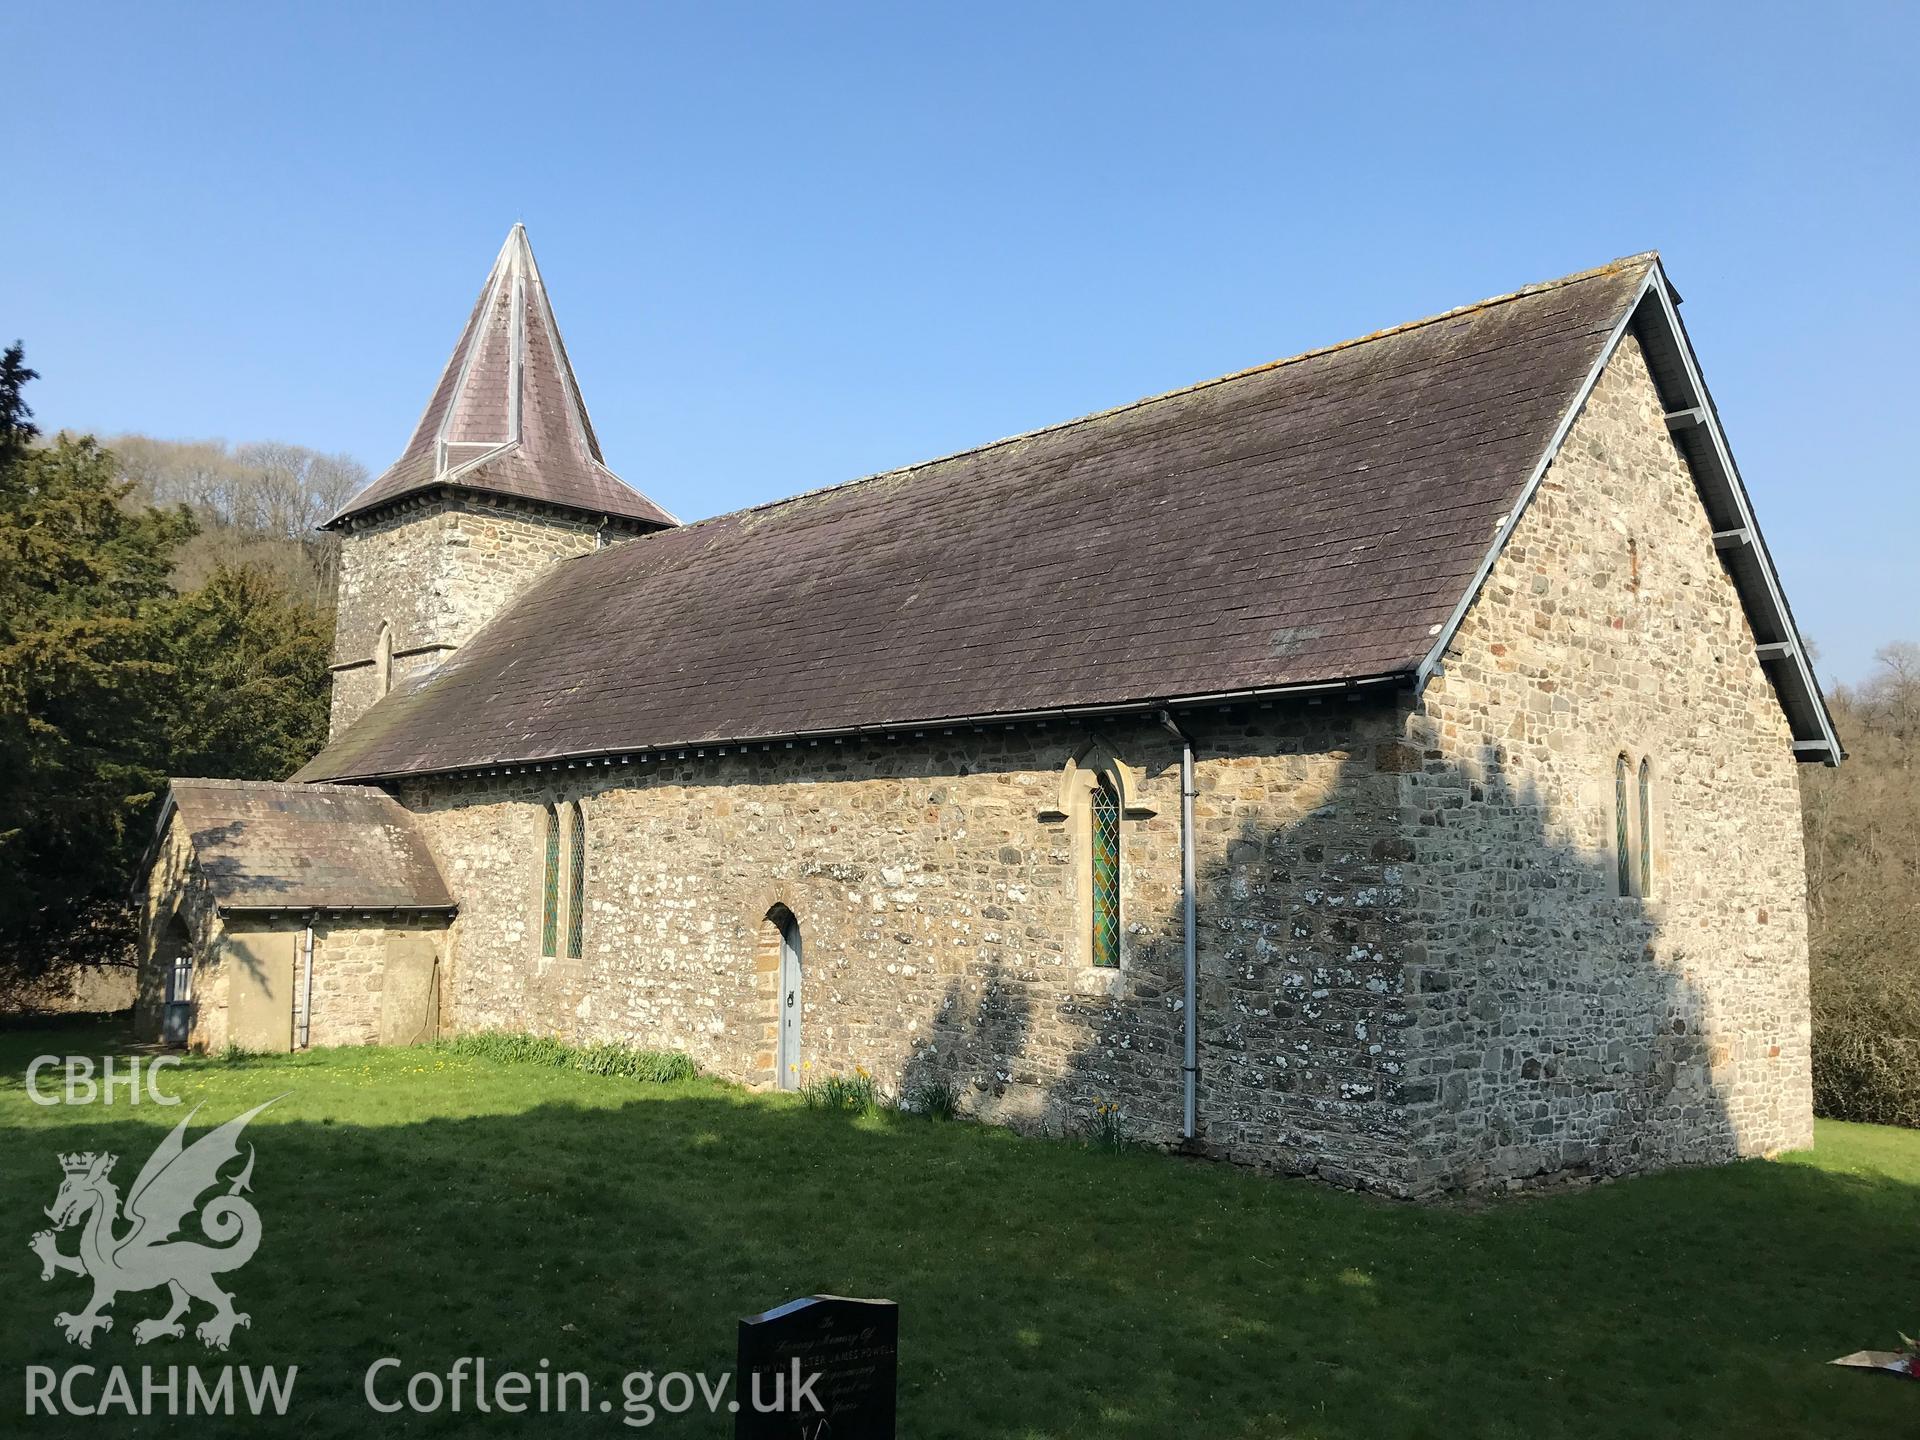 Colour photograph showing exterior view of Cefnllys church (dedicated to St. Michael), east of Llandrindod Wells, taken by Paul R. Davis on 30th March 2019.